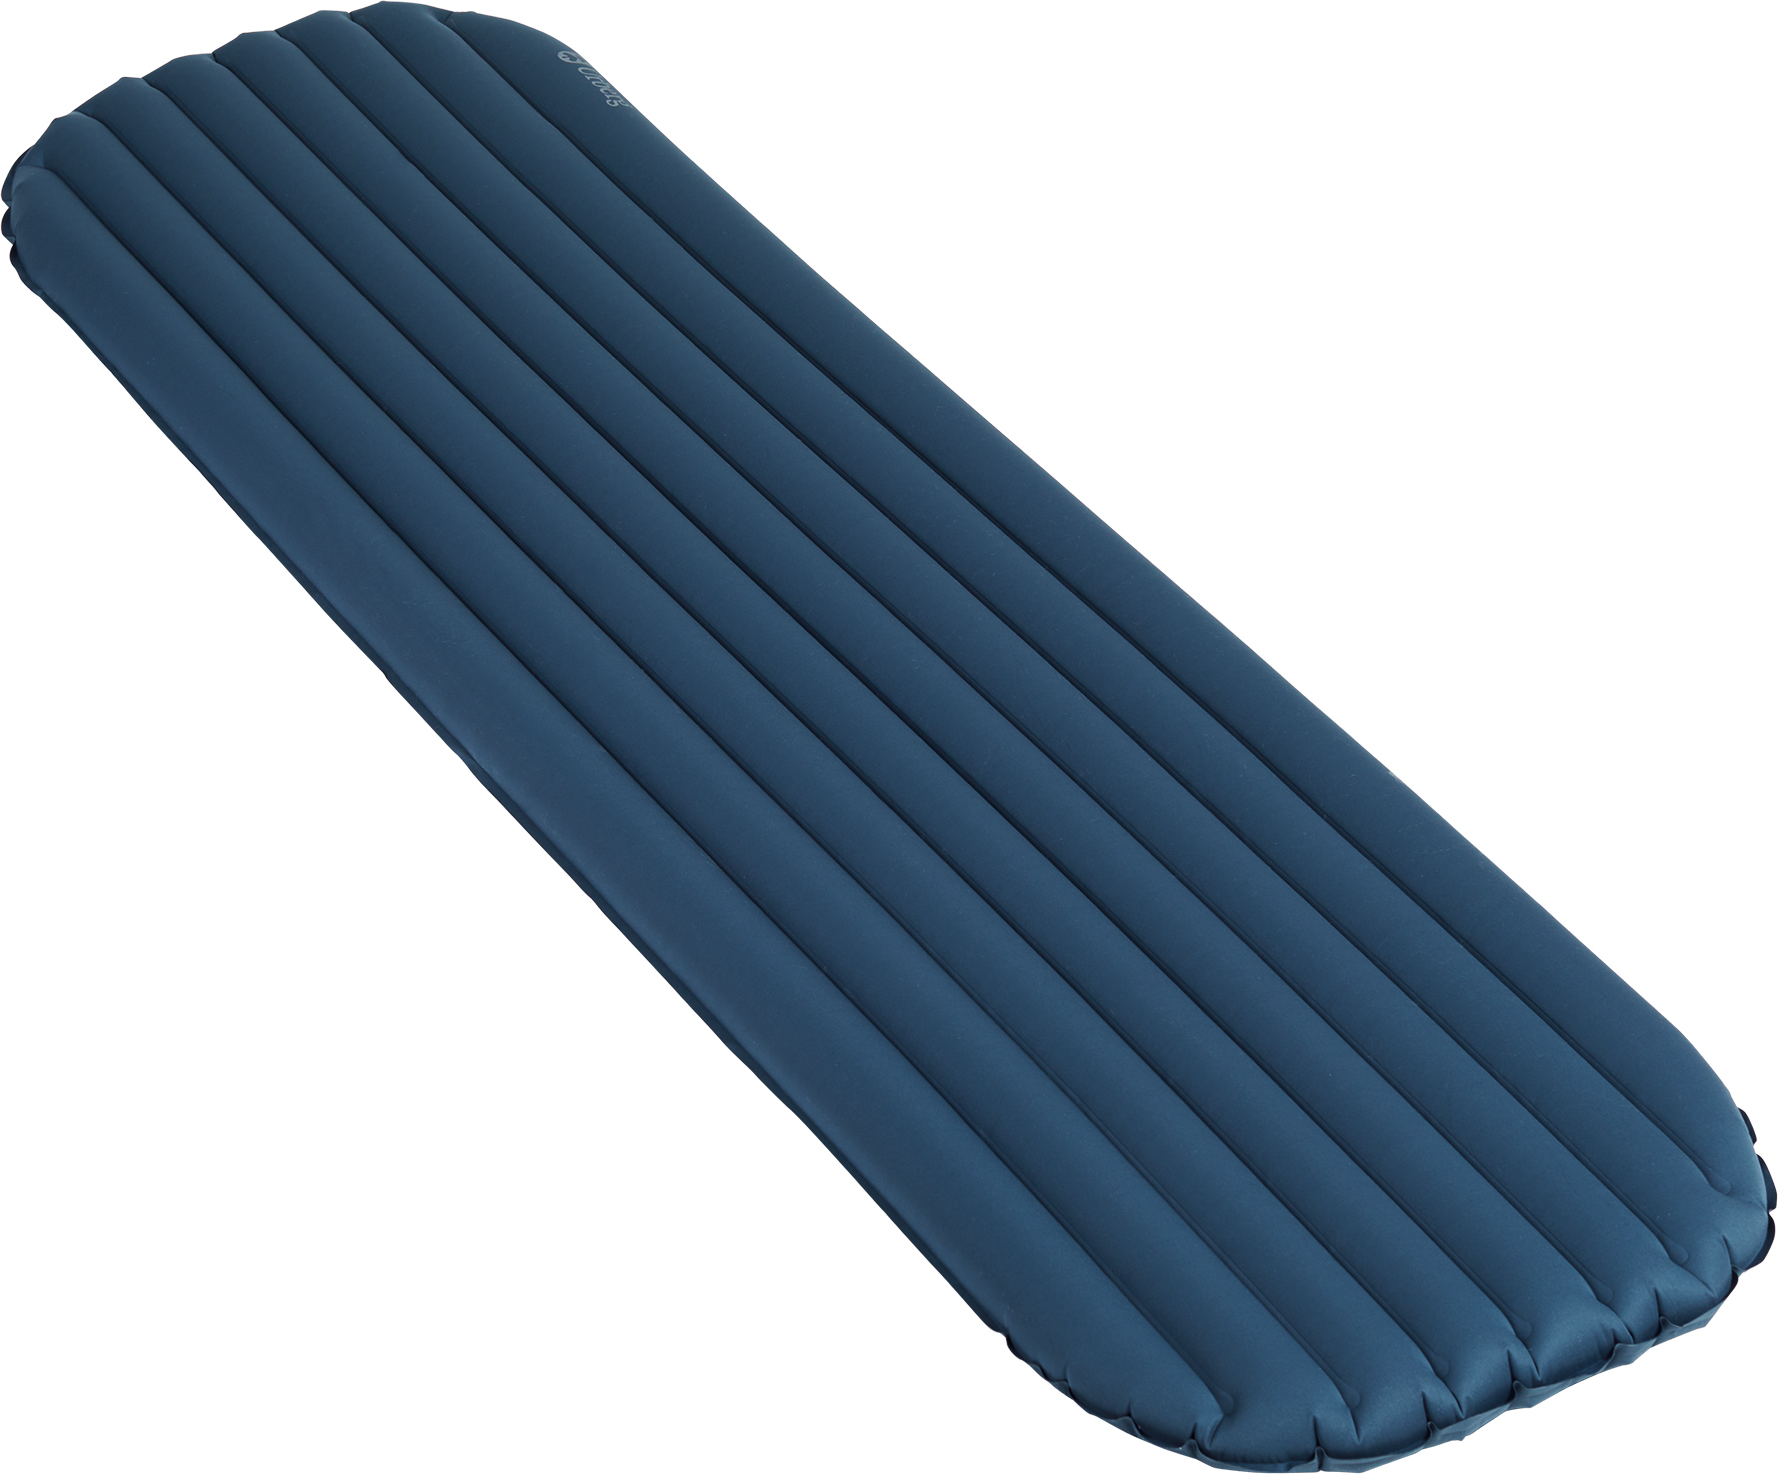 Urberg Insulated Airmat Vertical Channels Midnight Navy